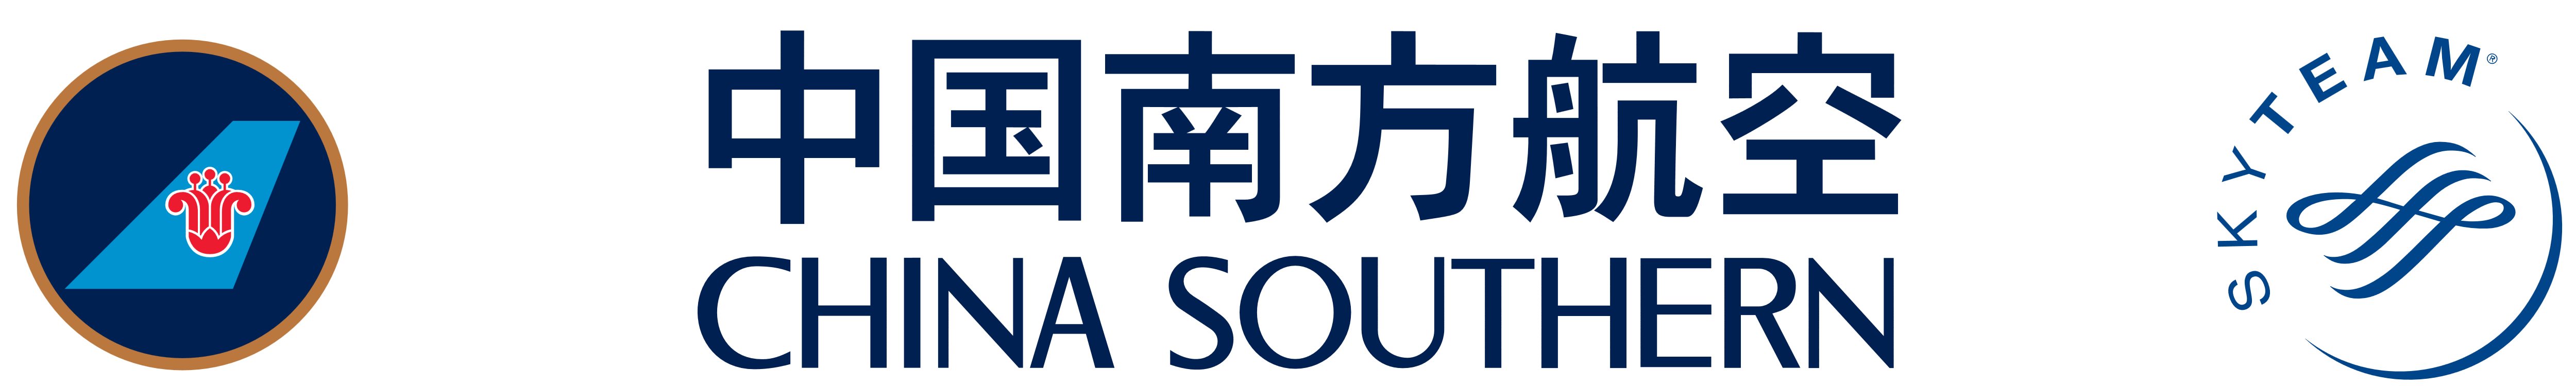 China Southern Airlines Logo 